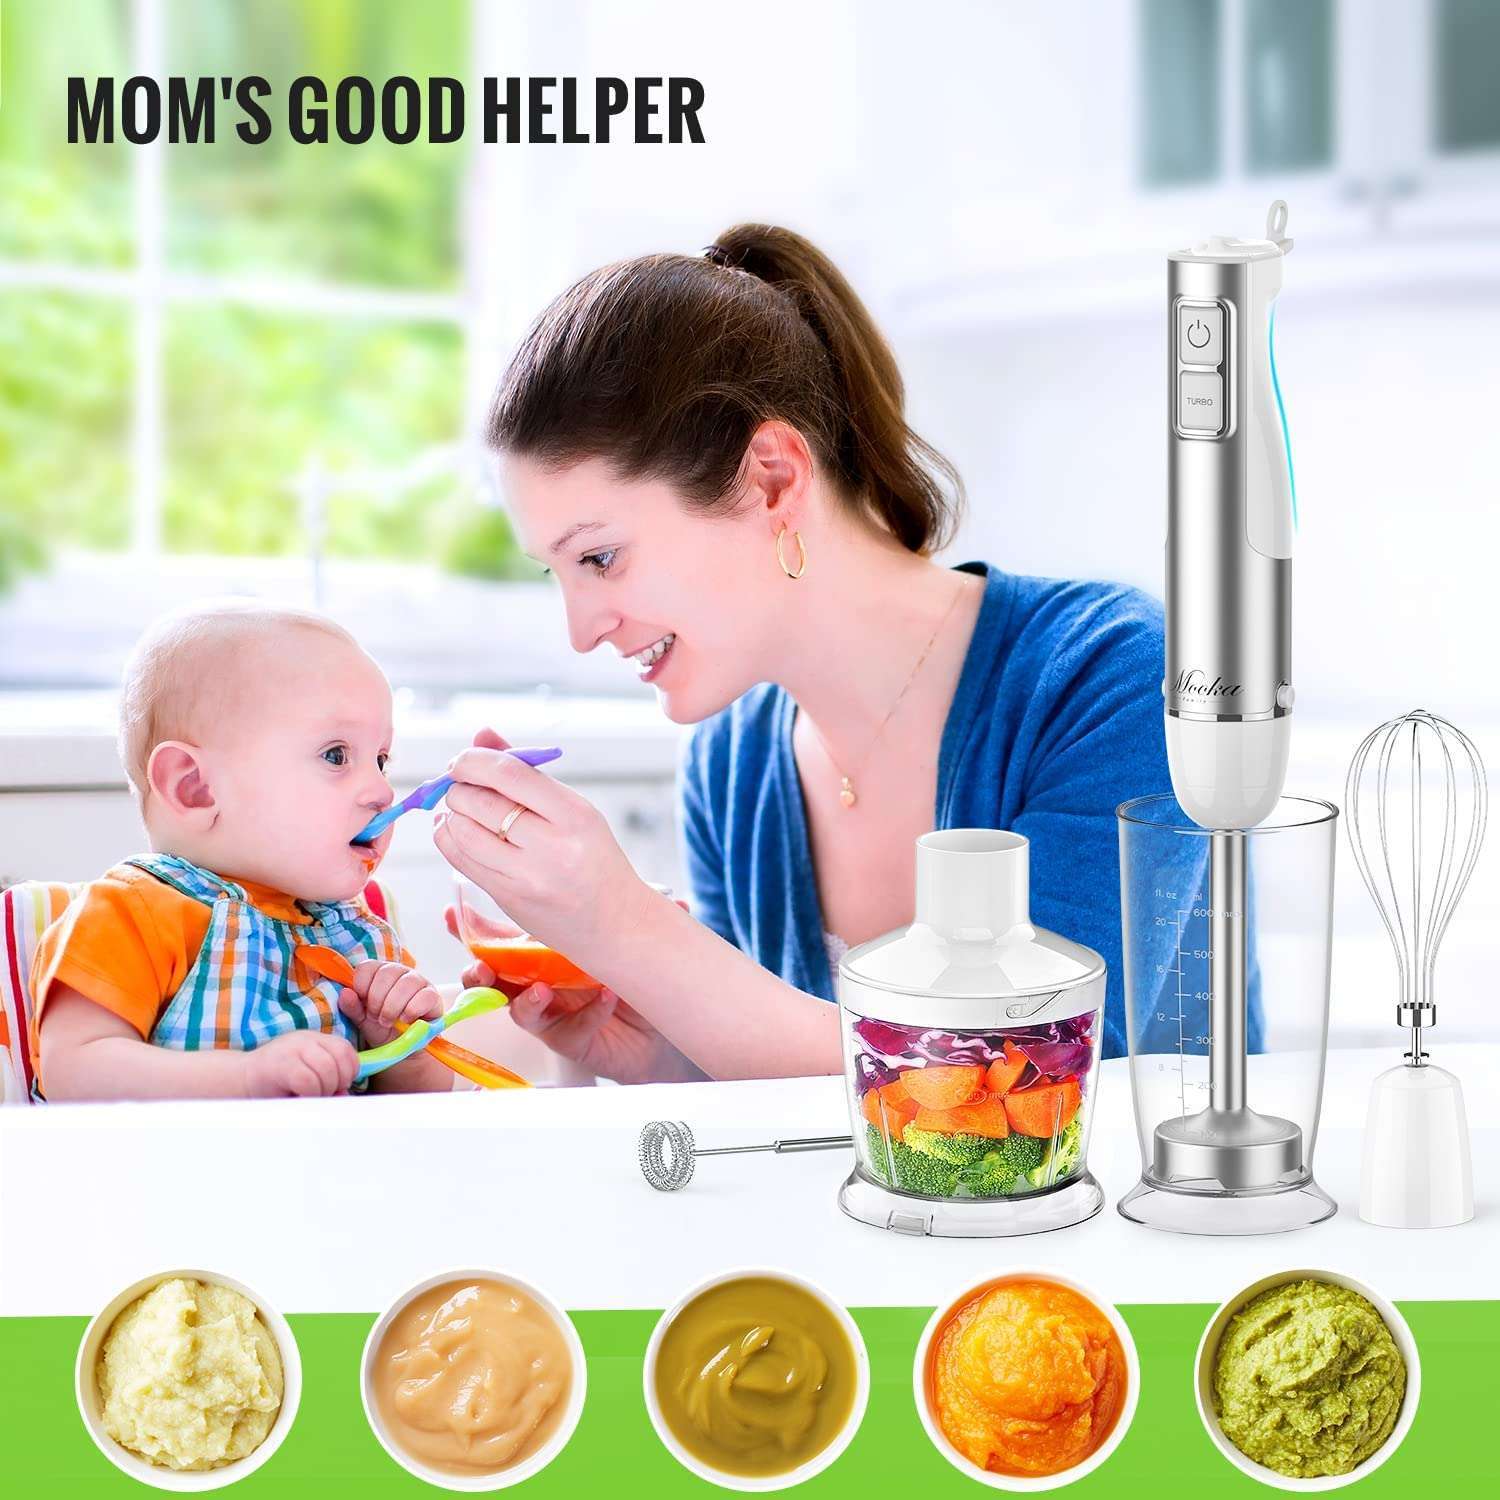 5 in 1 Multi-Purpose Immersion Hand Blender Set (by quicklify)